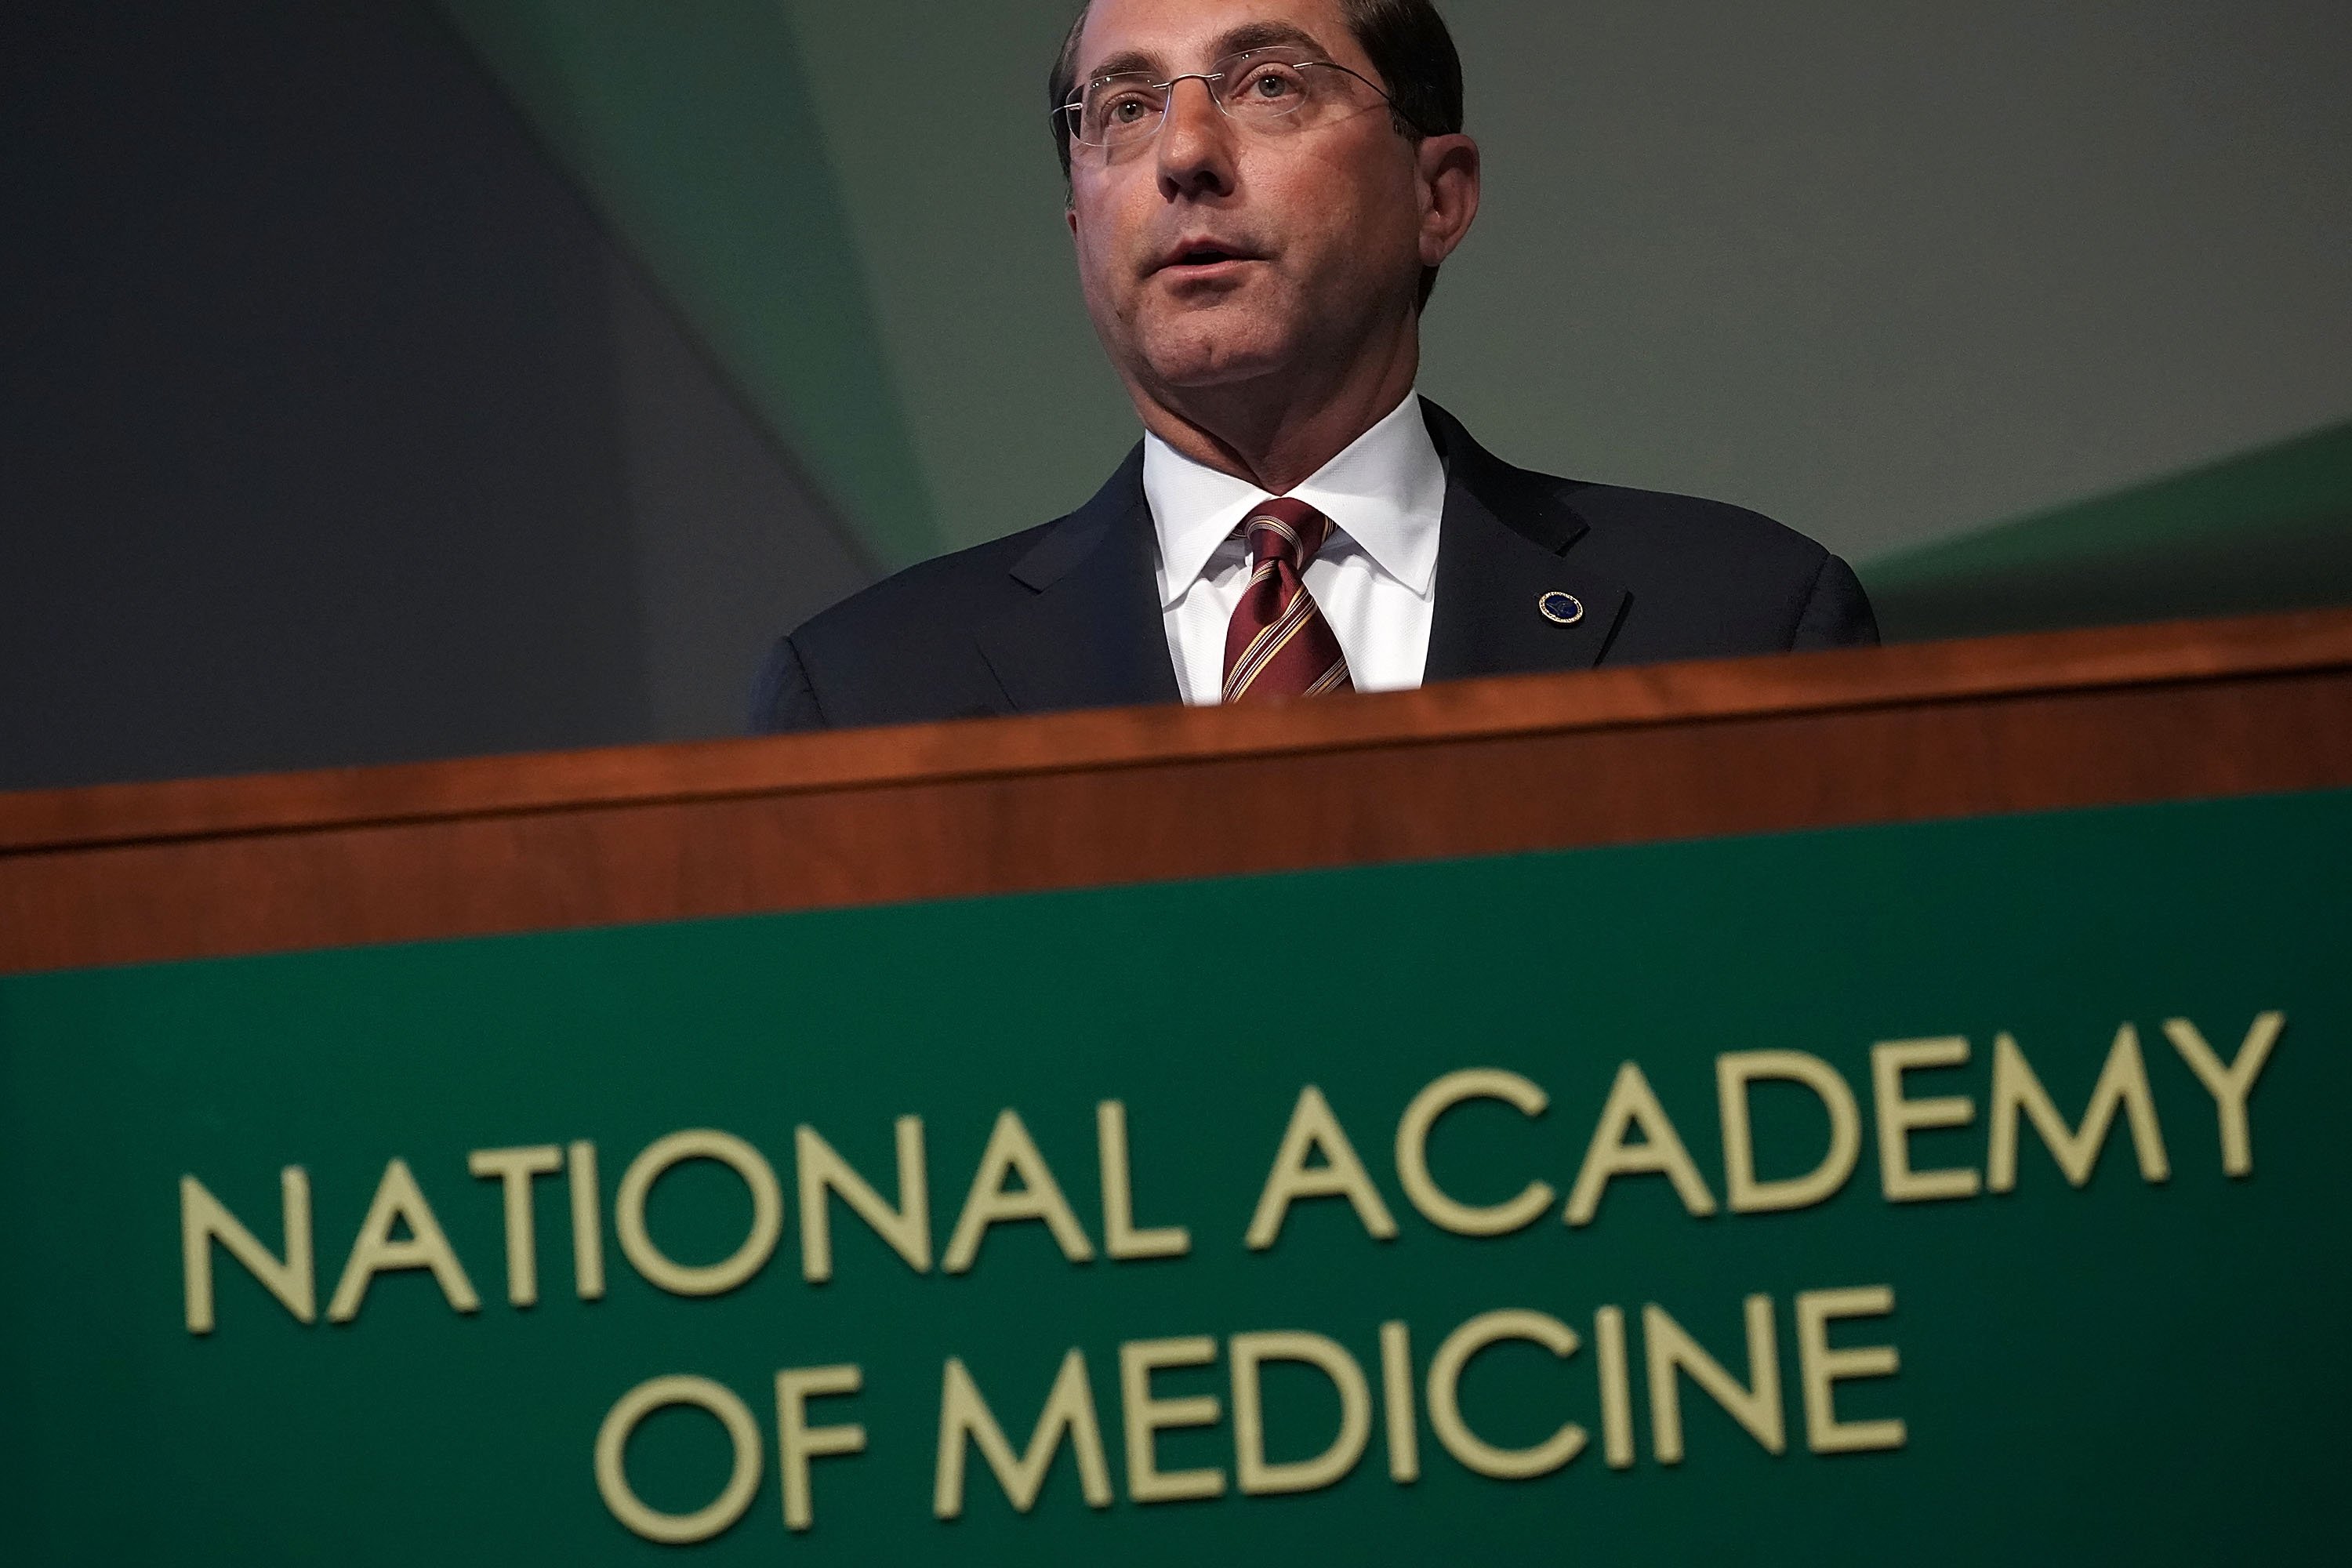 U.S. Secretary of Health and Human Services Alex Azar speaks on prescription drugs for the market during the 2018 National Academy of Medicine Annual Meeting October 15, 2018 at the National Academy of Sciences in Washington, DC. Alex Wong/Getty Images